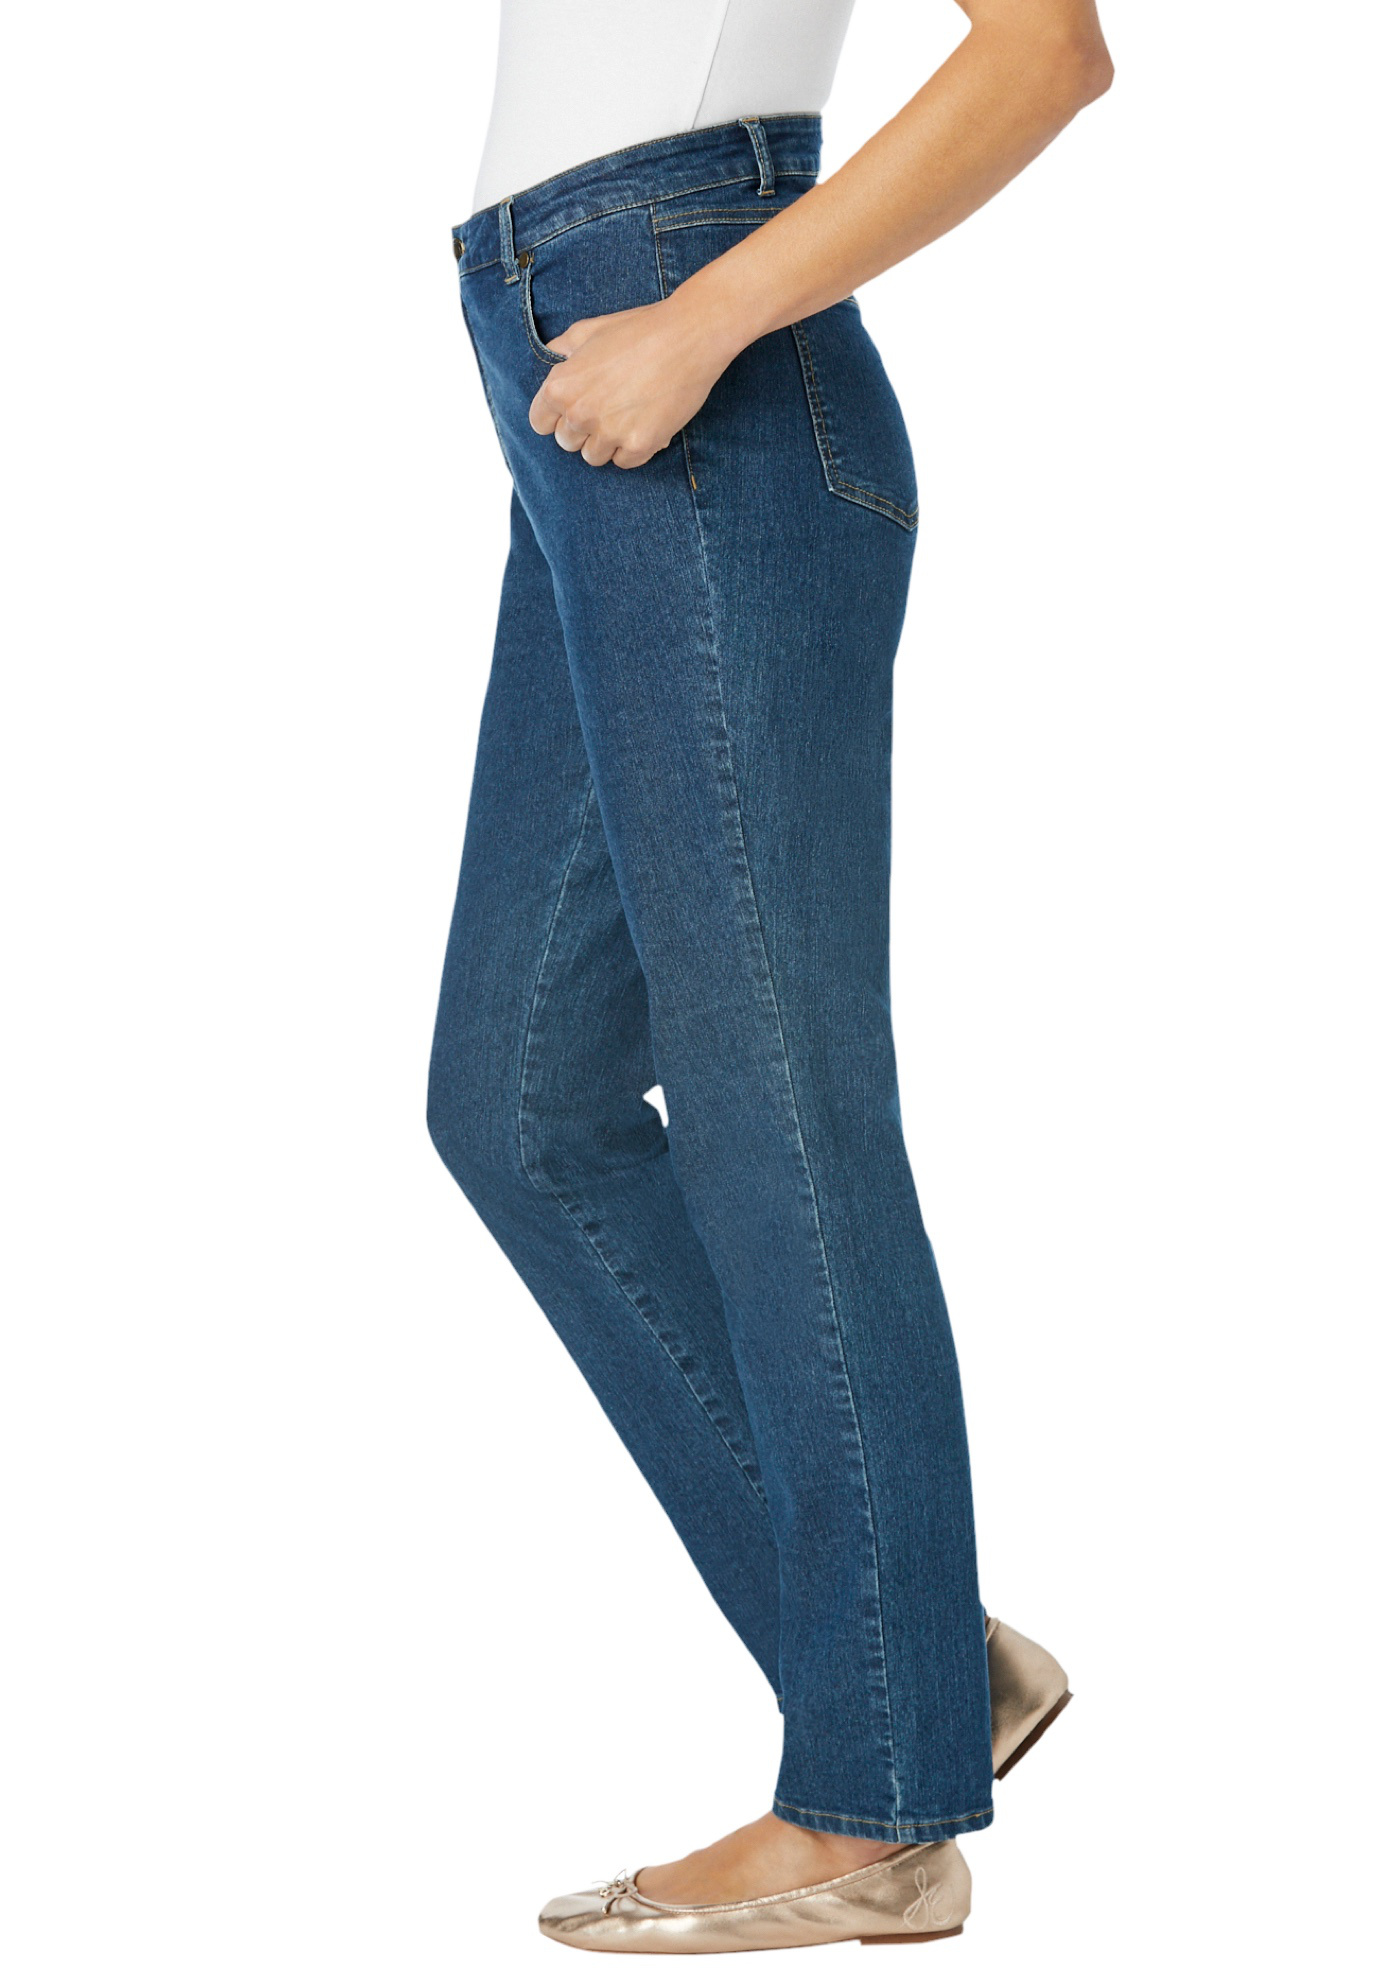 Woman Within Women's Plus Size Straight Leg Stretch Jean Jean - image 4 of 6